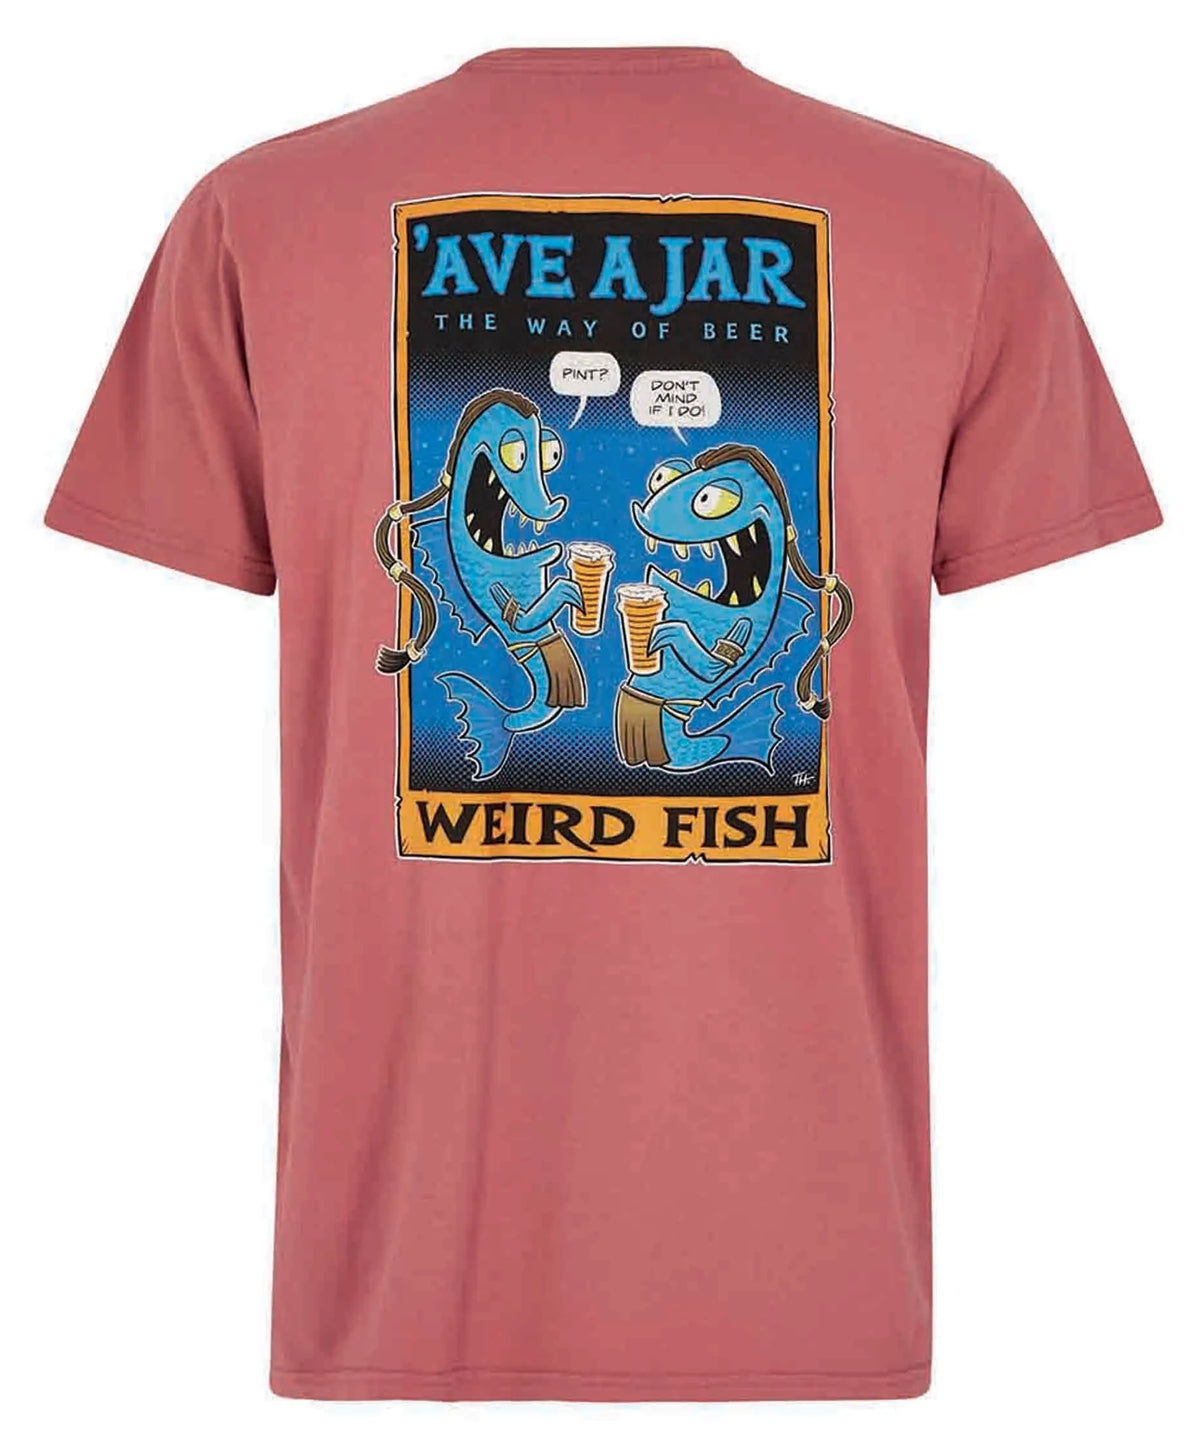 Weird Fish men's Ave a Jar: The Way of Beer, printed Avatar themed short sleeve t-shirt in Rosewood.